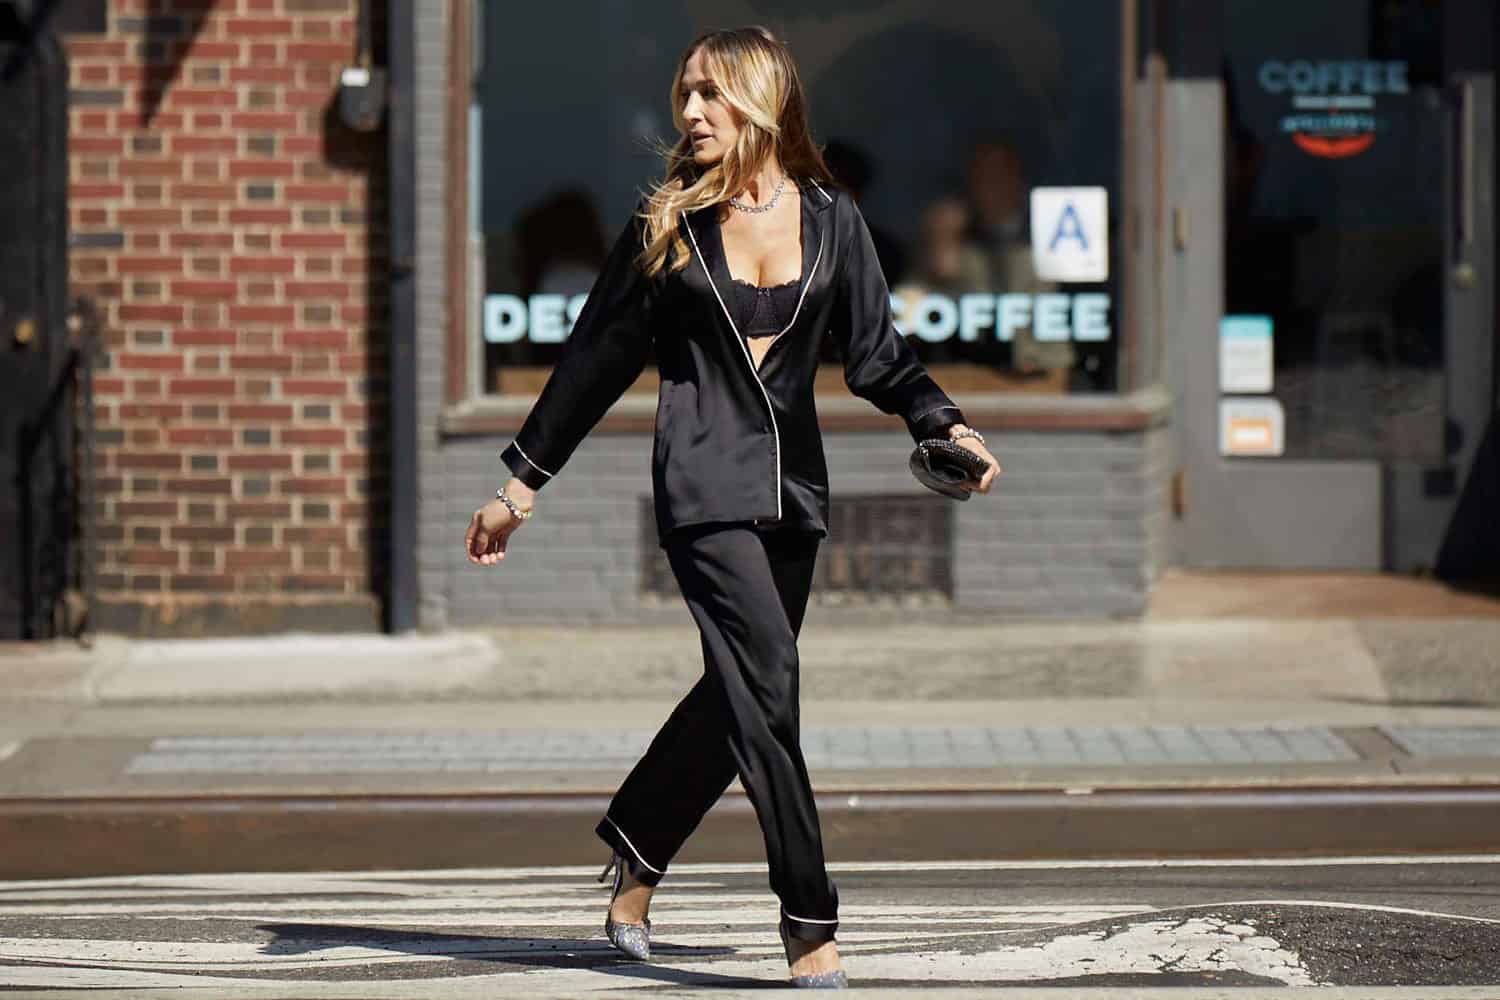 Sarah Jessica Parker Channels Carrie Bradshaw in New Campaign